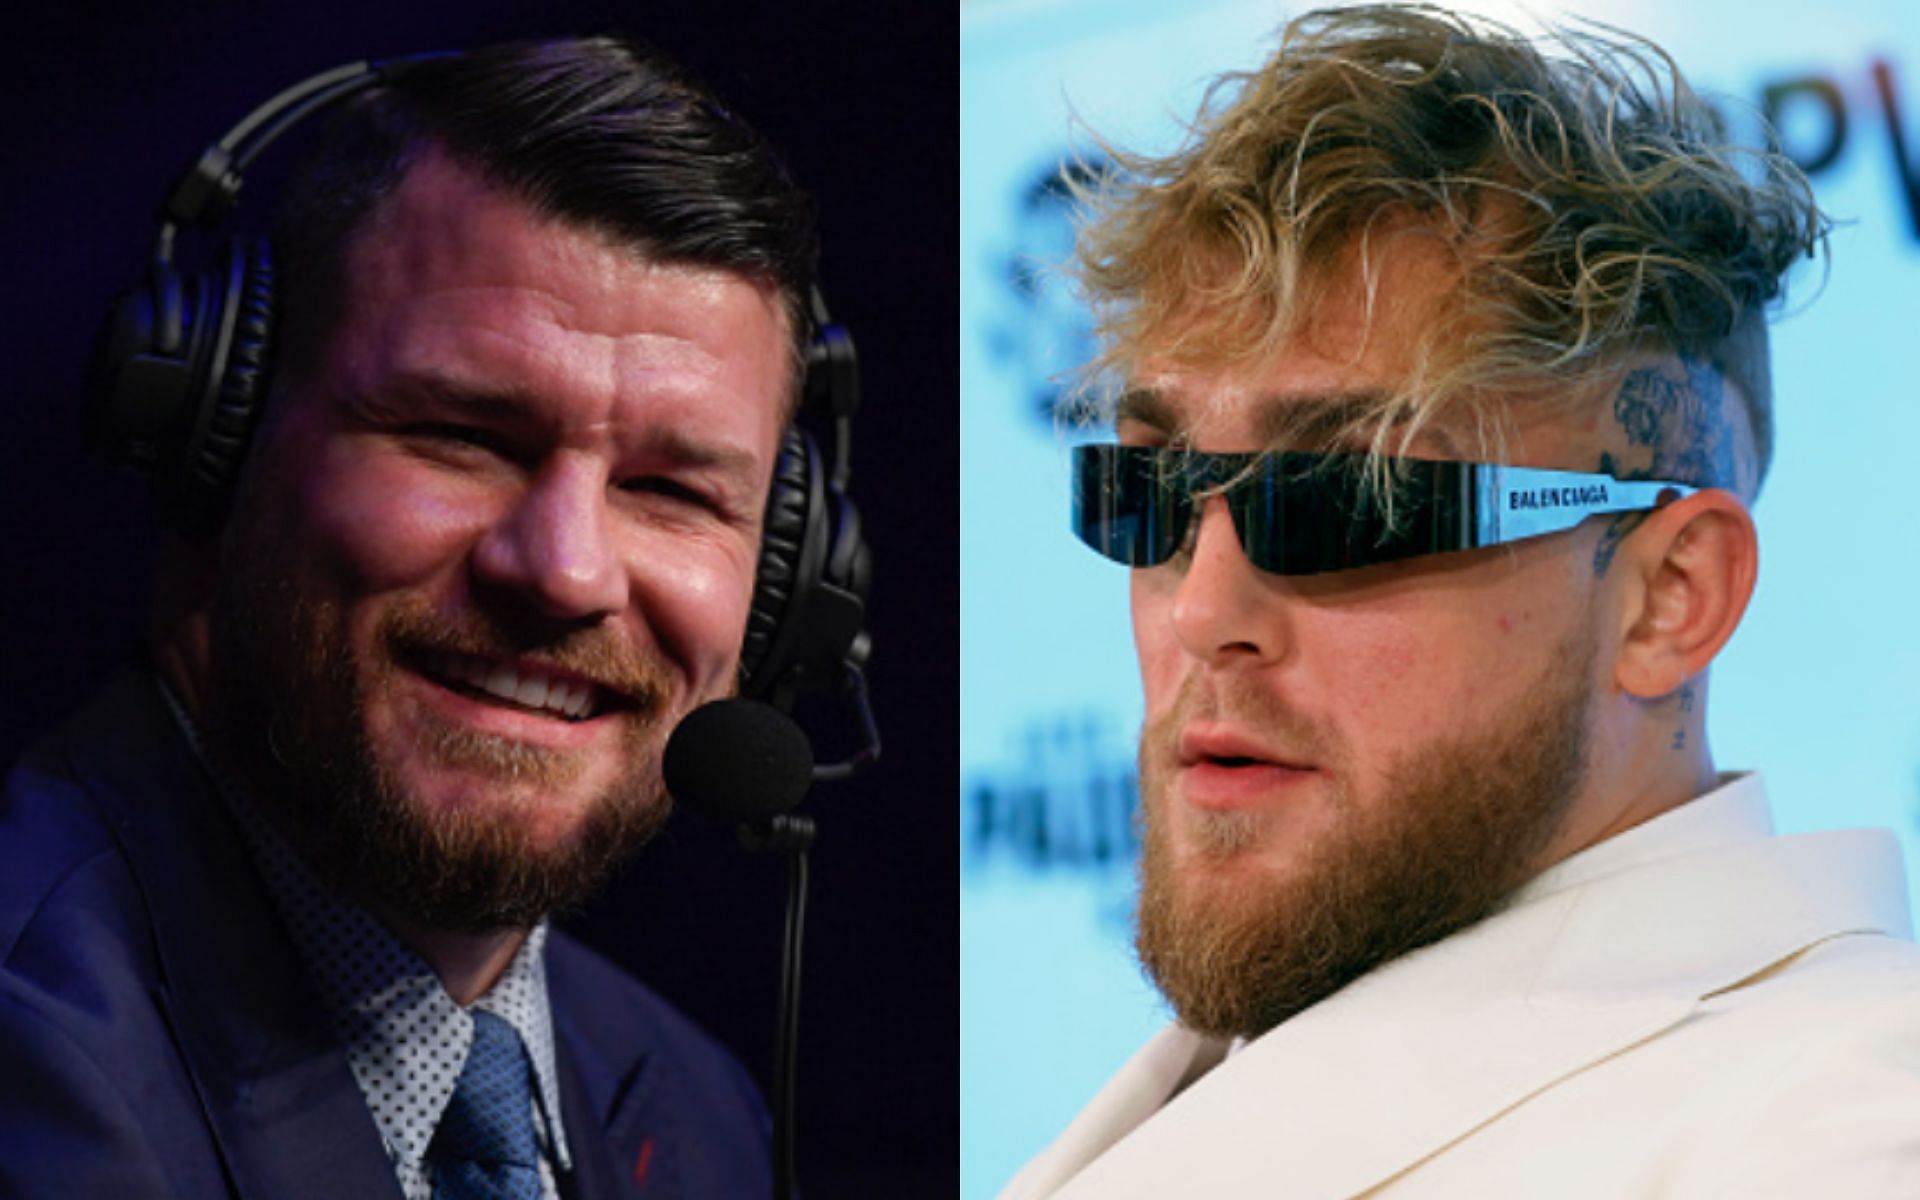 Michael Bisping (left); Jake Paul (right)